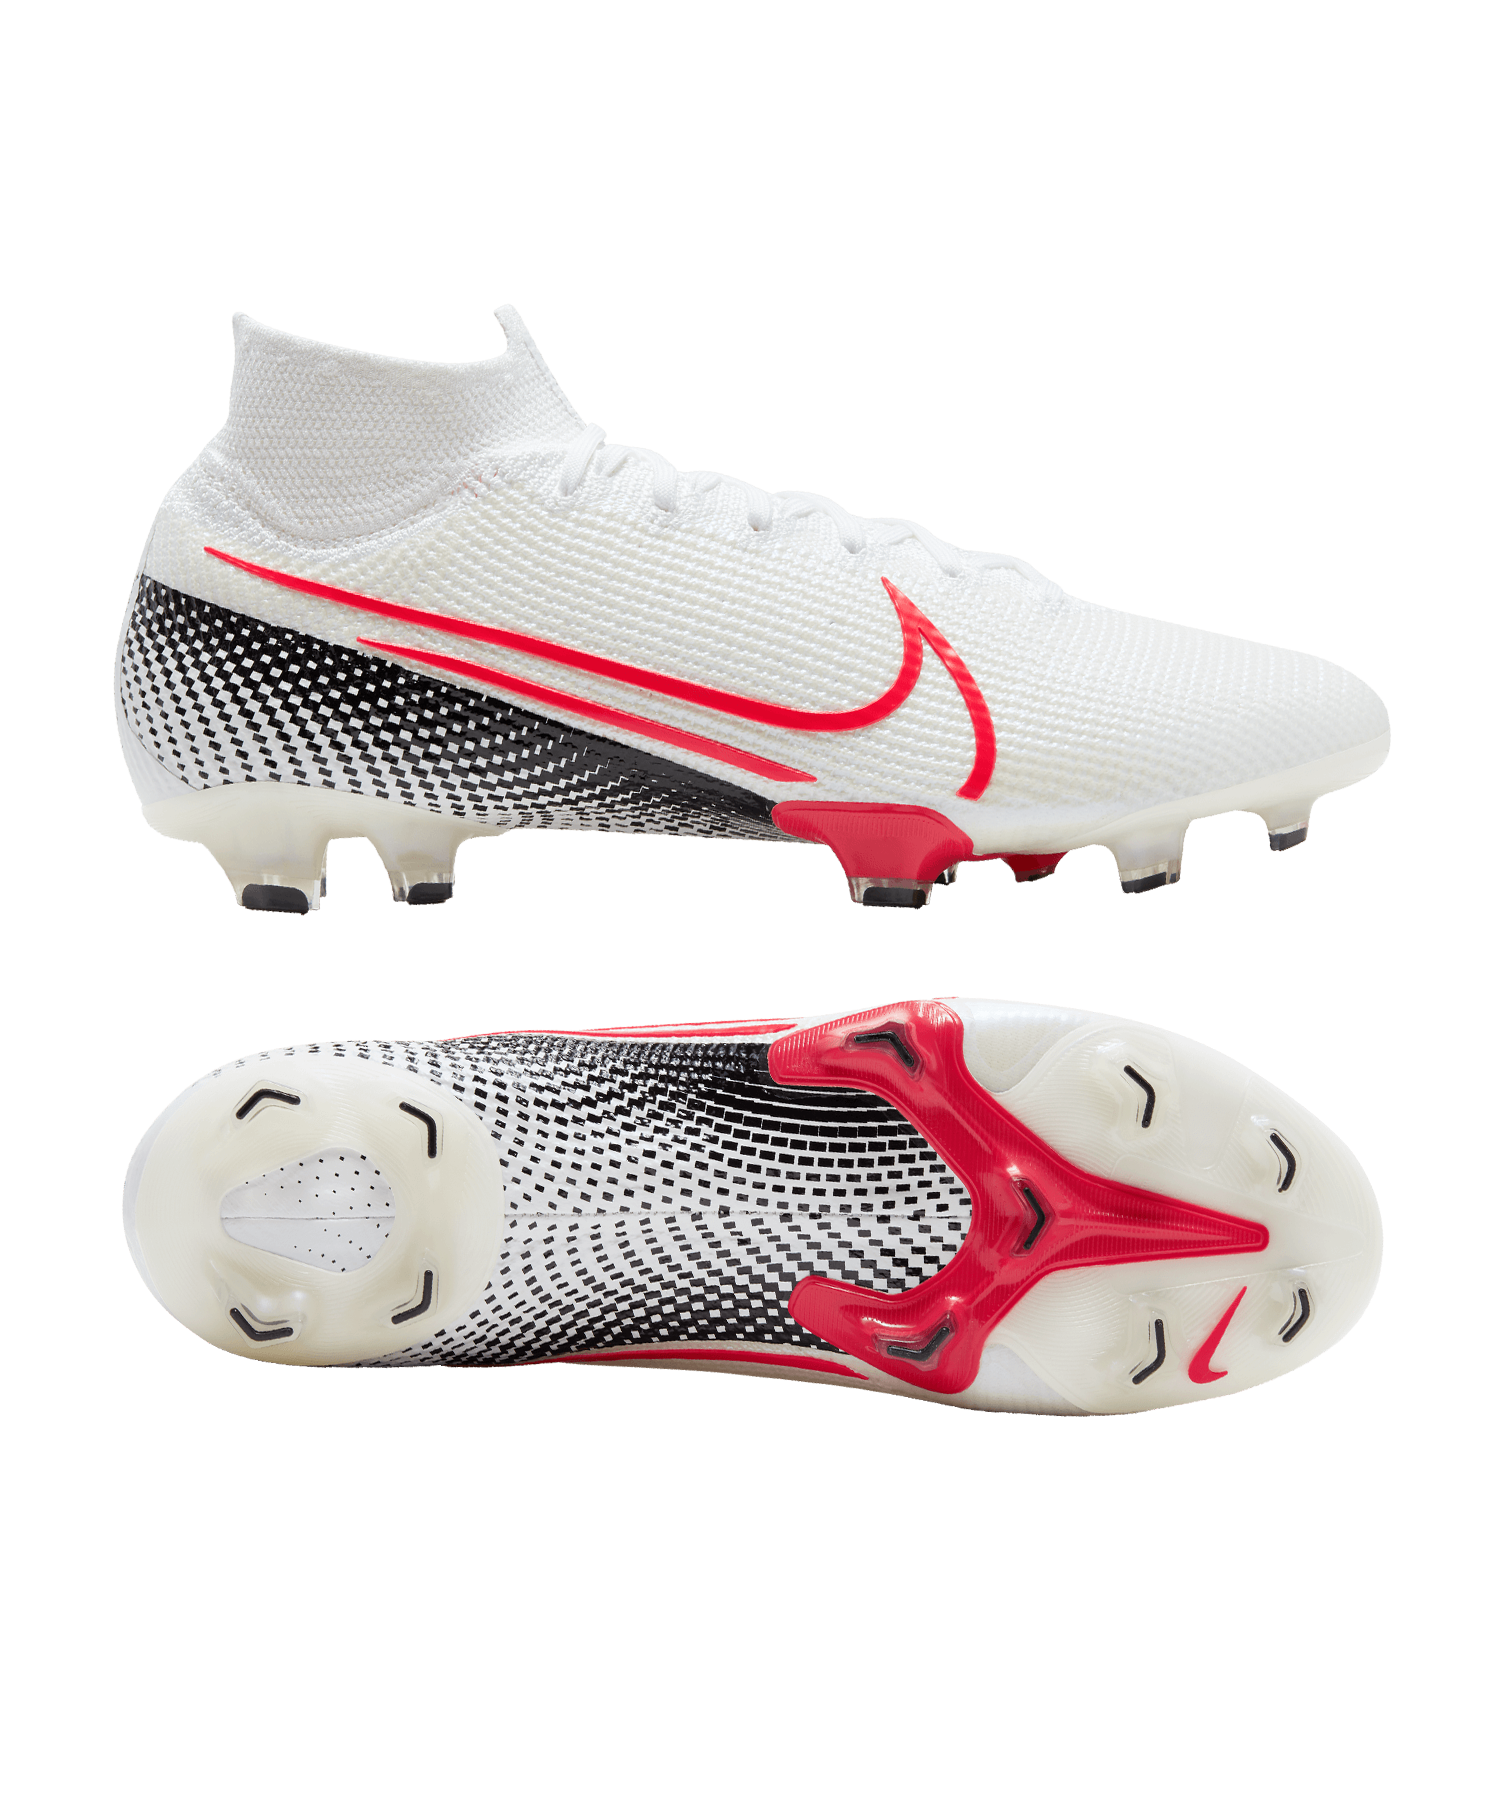 Nike Men 's MDS Superfly 7 Elite Firm Ground Cleats Sport.